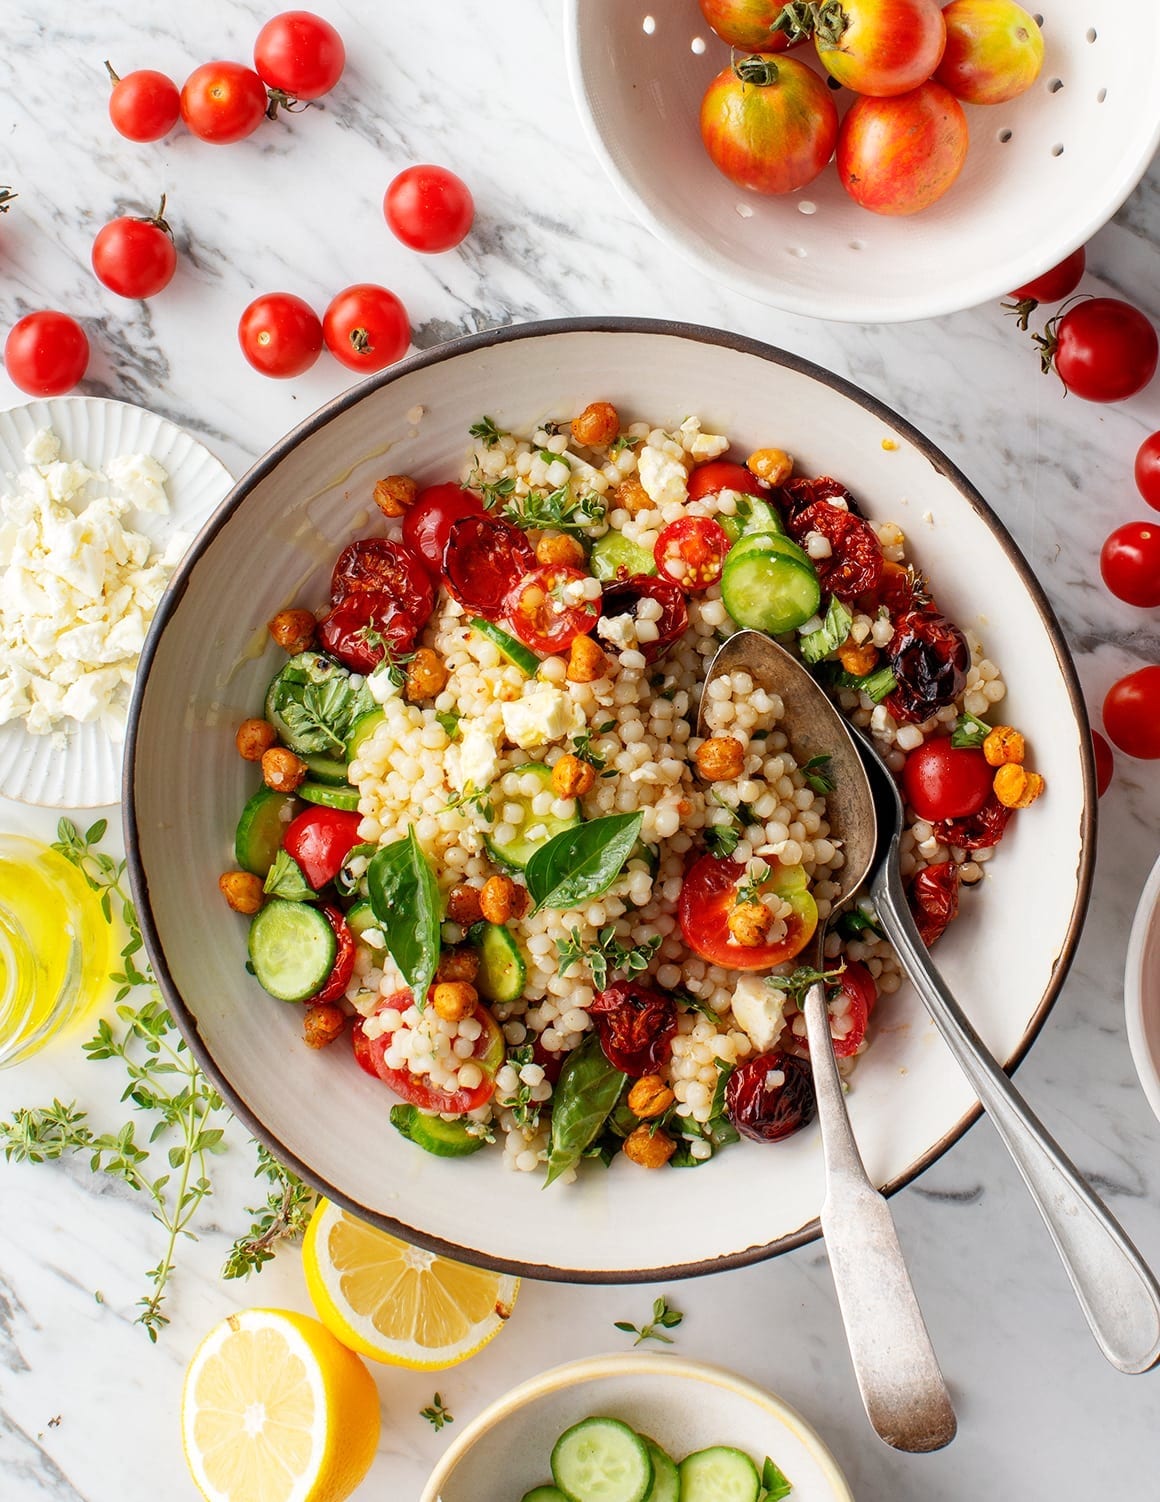 Israeli couscous salad with cherry tomatoes and basil on a plate.